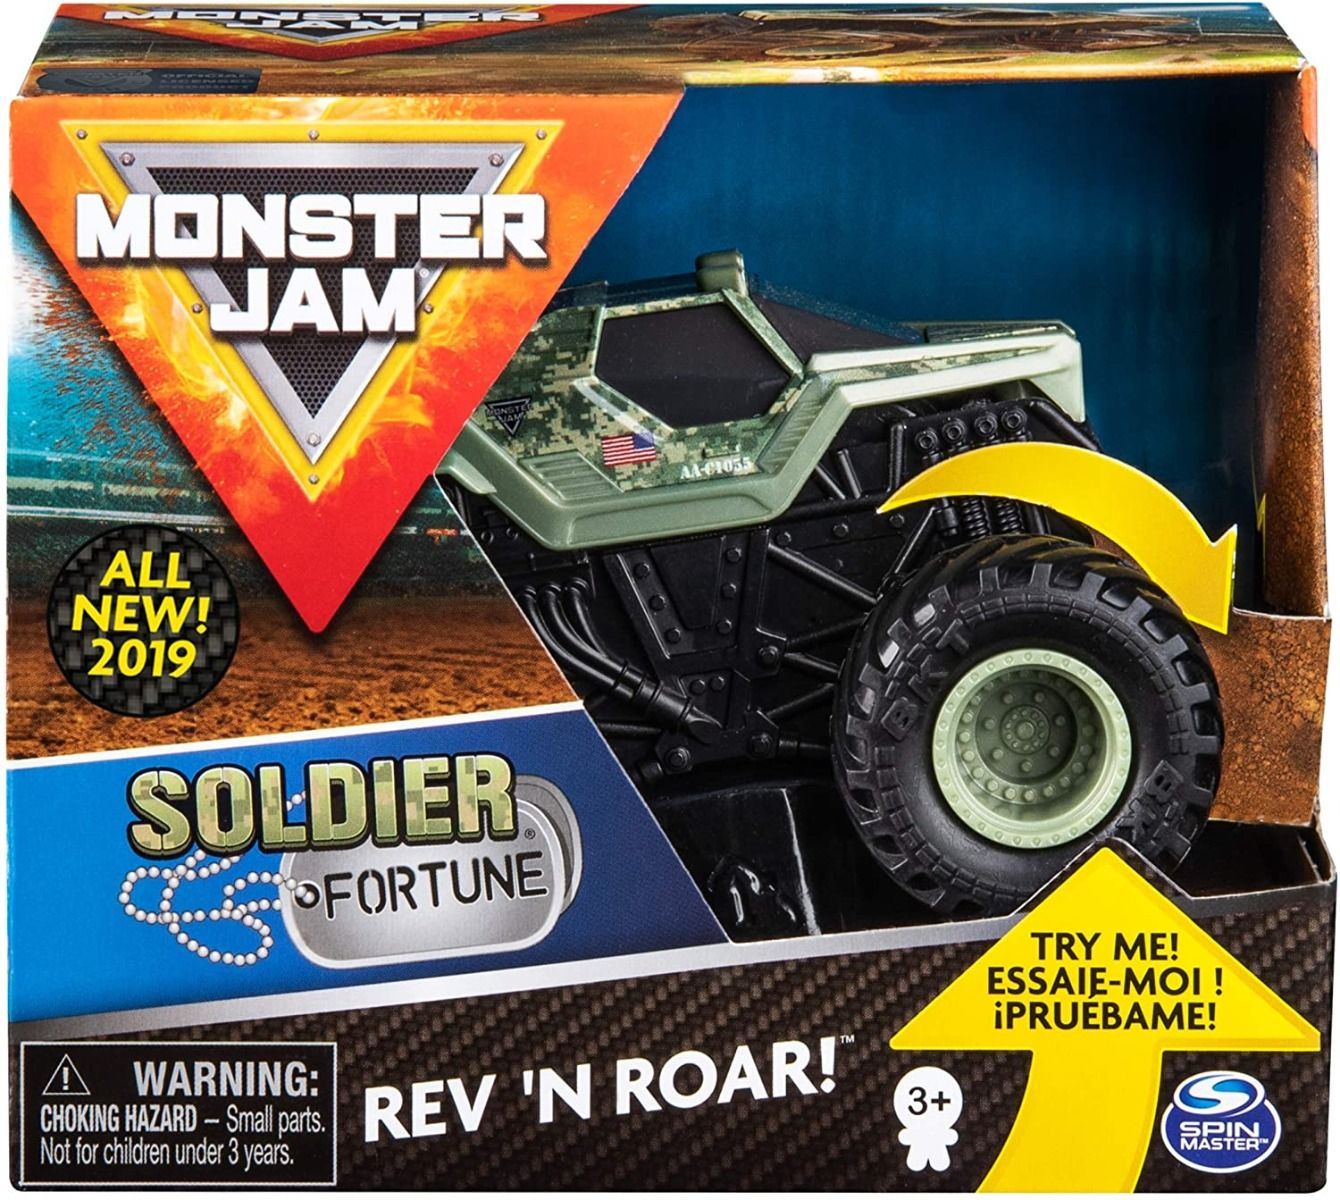 Rev 'em up and watch 'em ROAR! Introducing the all-new, Rev 'N Roar 1:43 scale, authentic Monster Ja